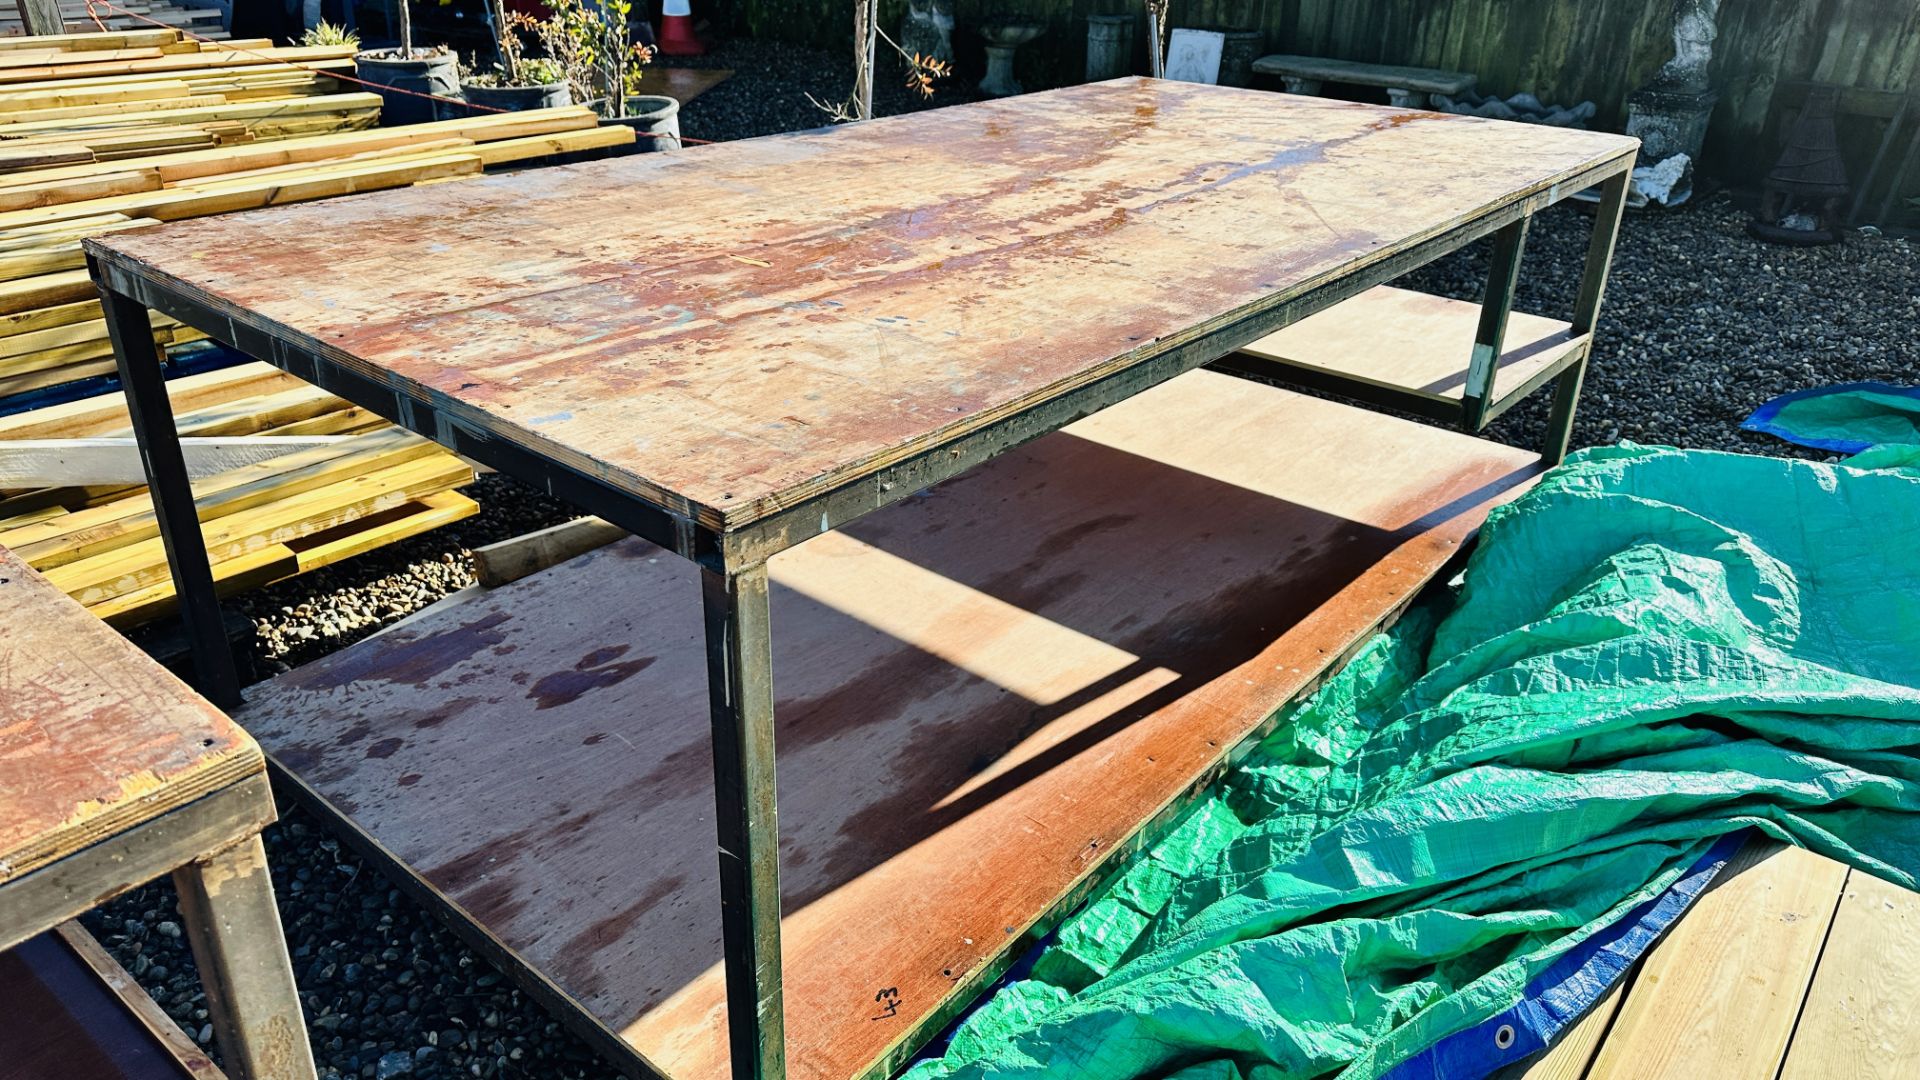 A HEAVY DUTY STEEL FRAMED WORK BENCH 122 X 244CM. THIS LOT IS SUBJECT TO VAT ON HAMMER PRICE.